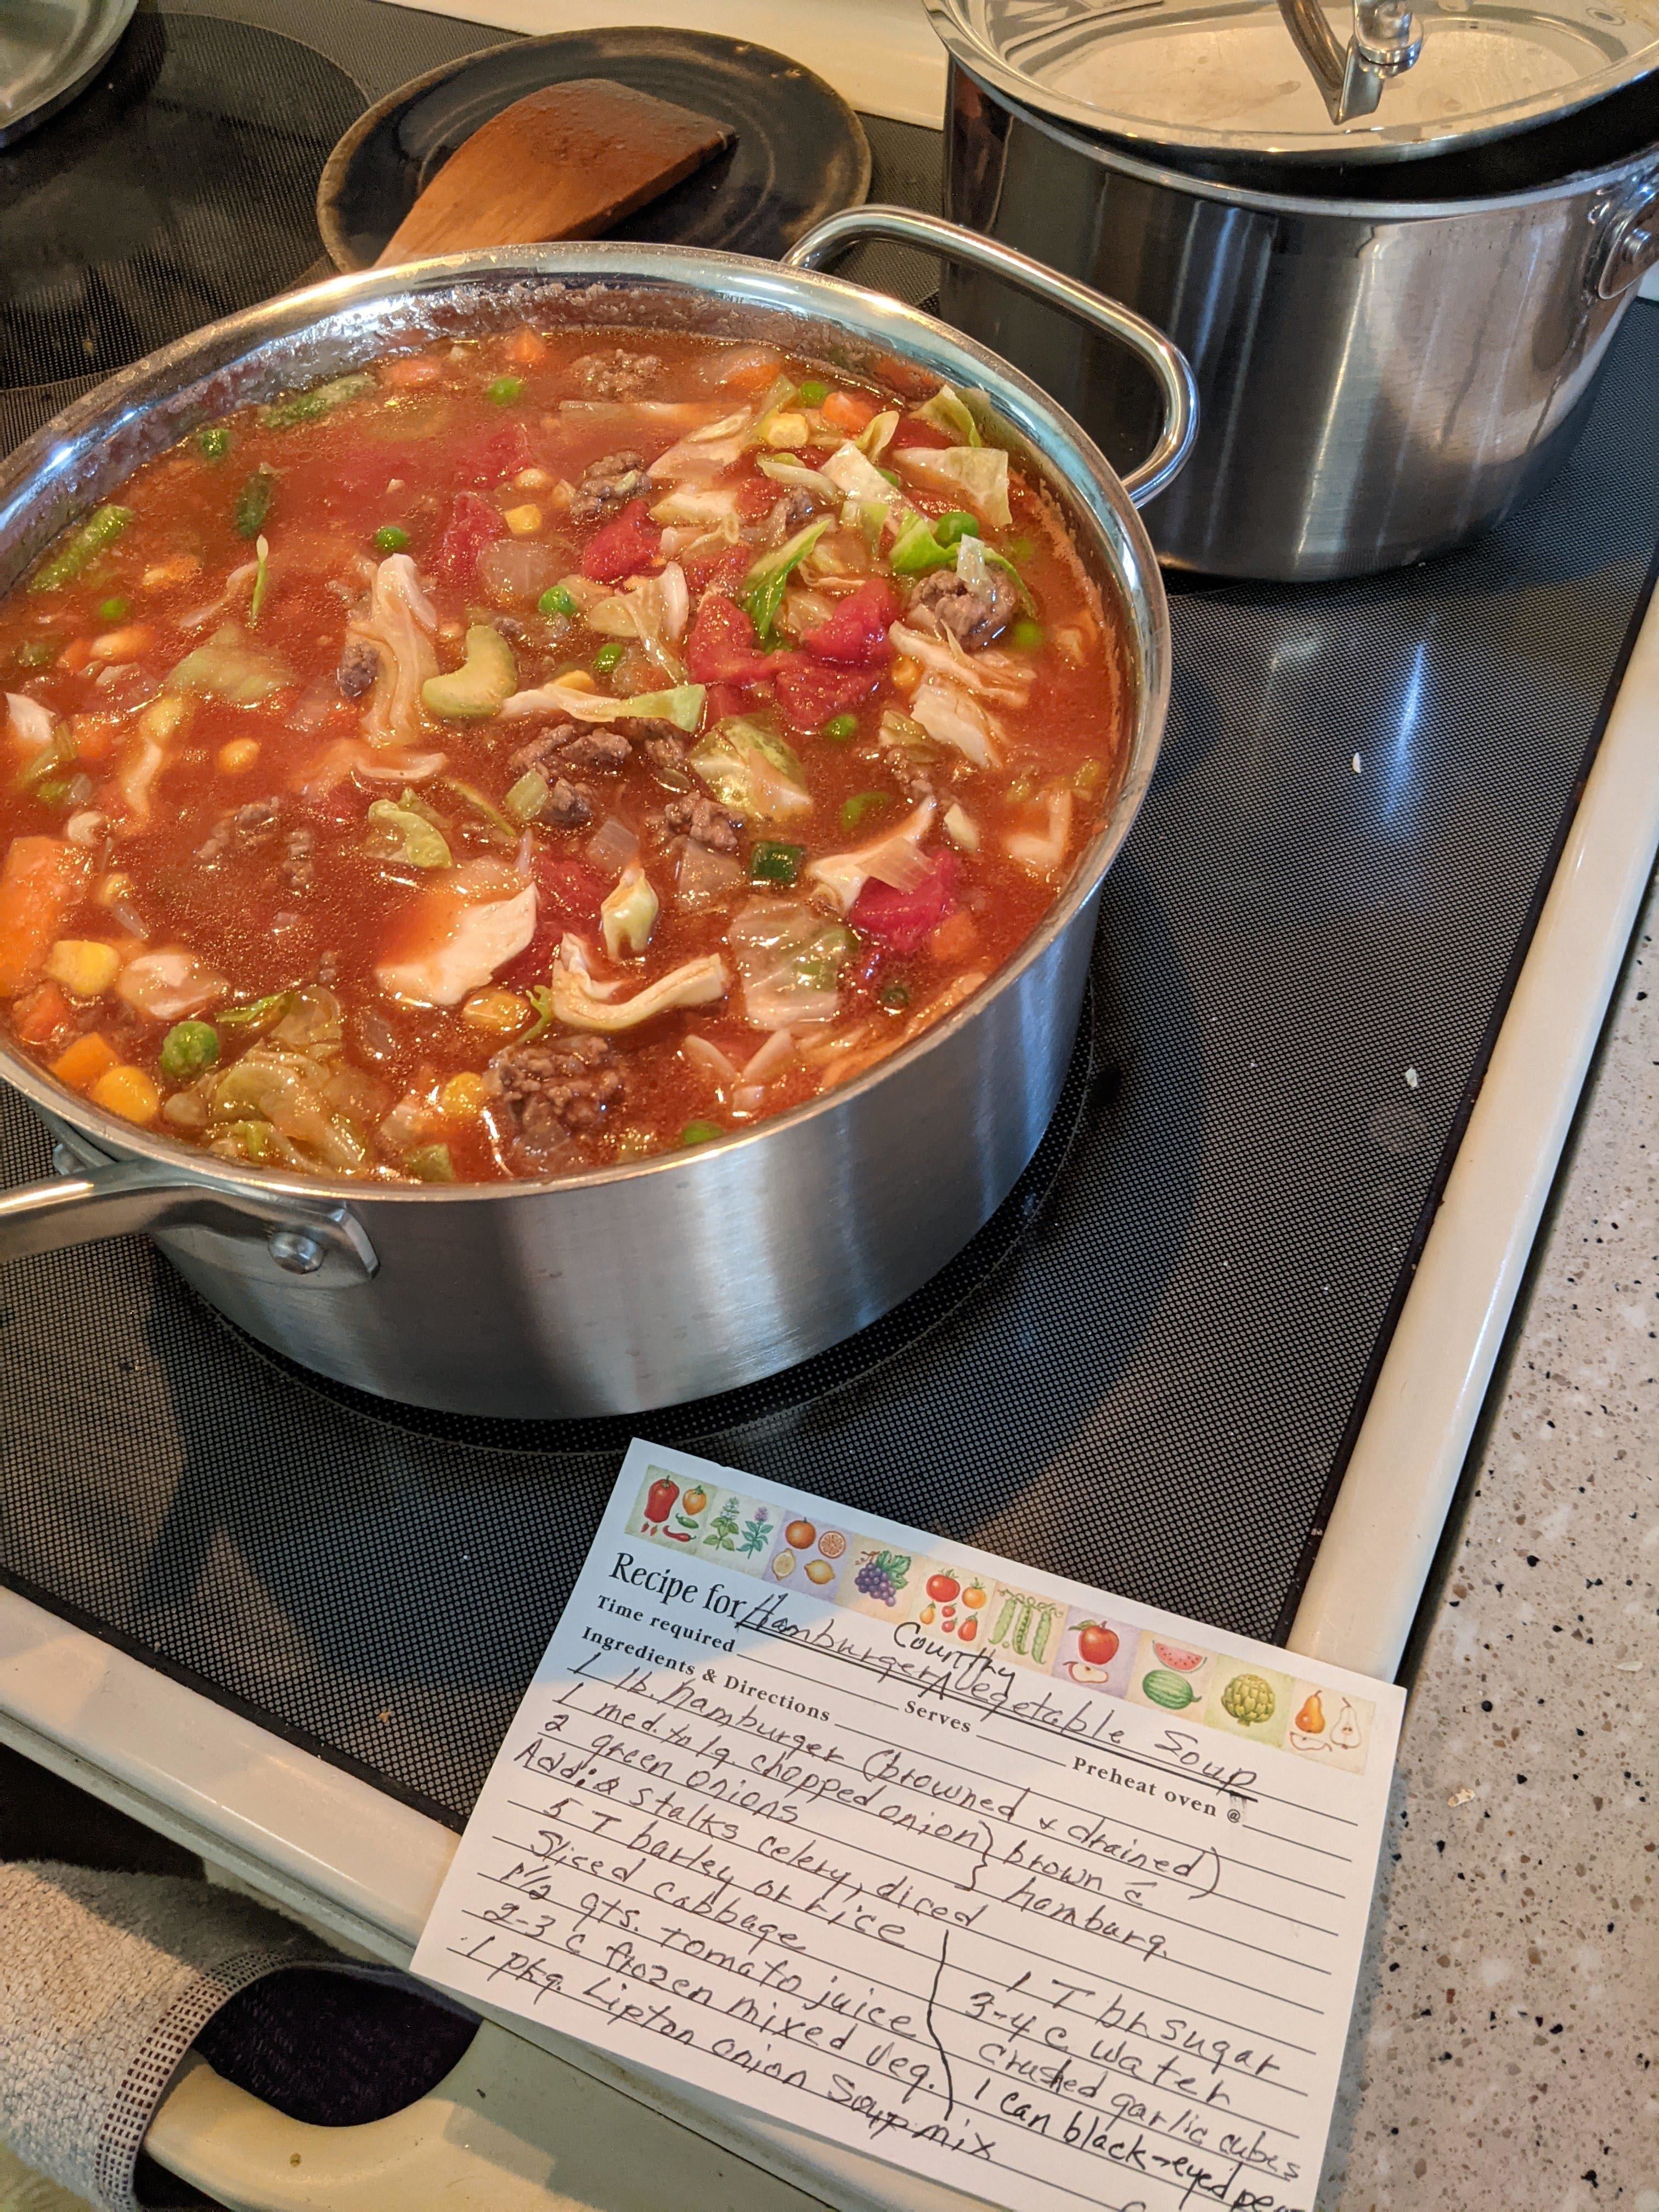 A pot of homemade soup on a stove with a handwritten recipe card in front